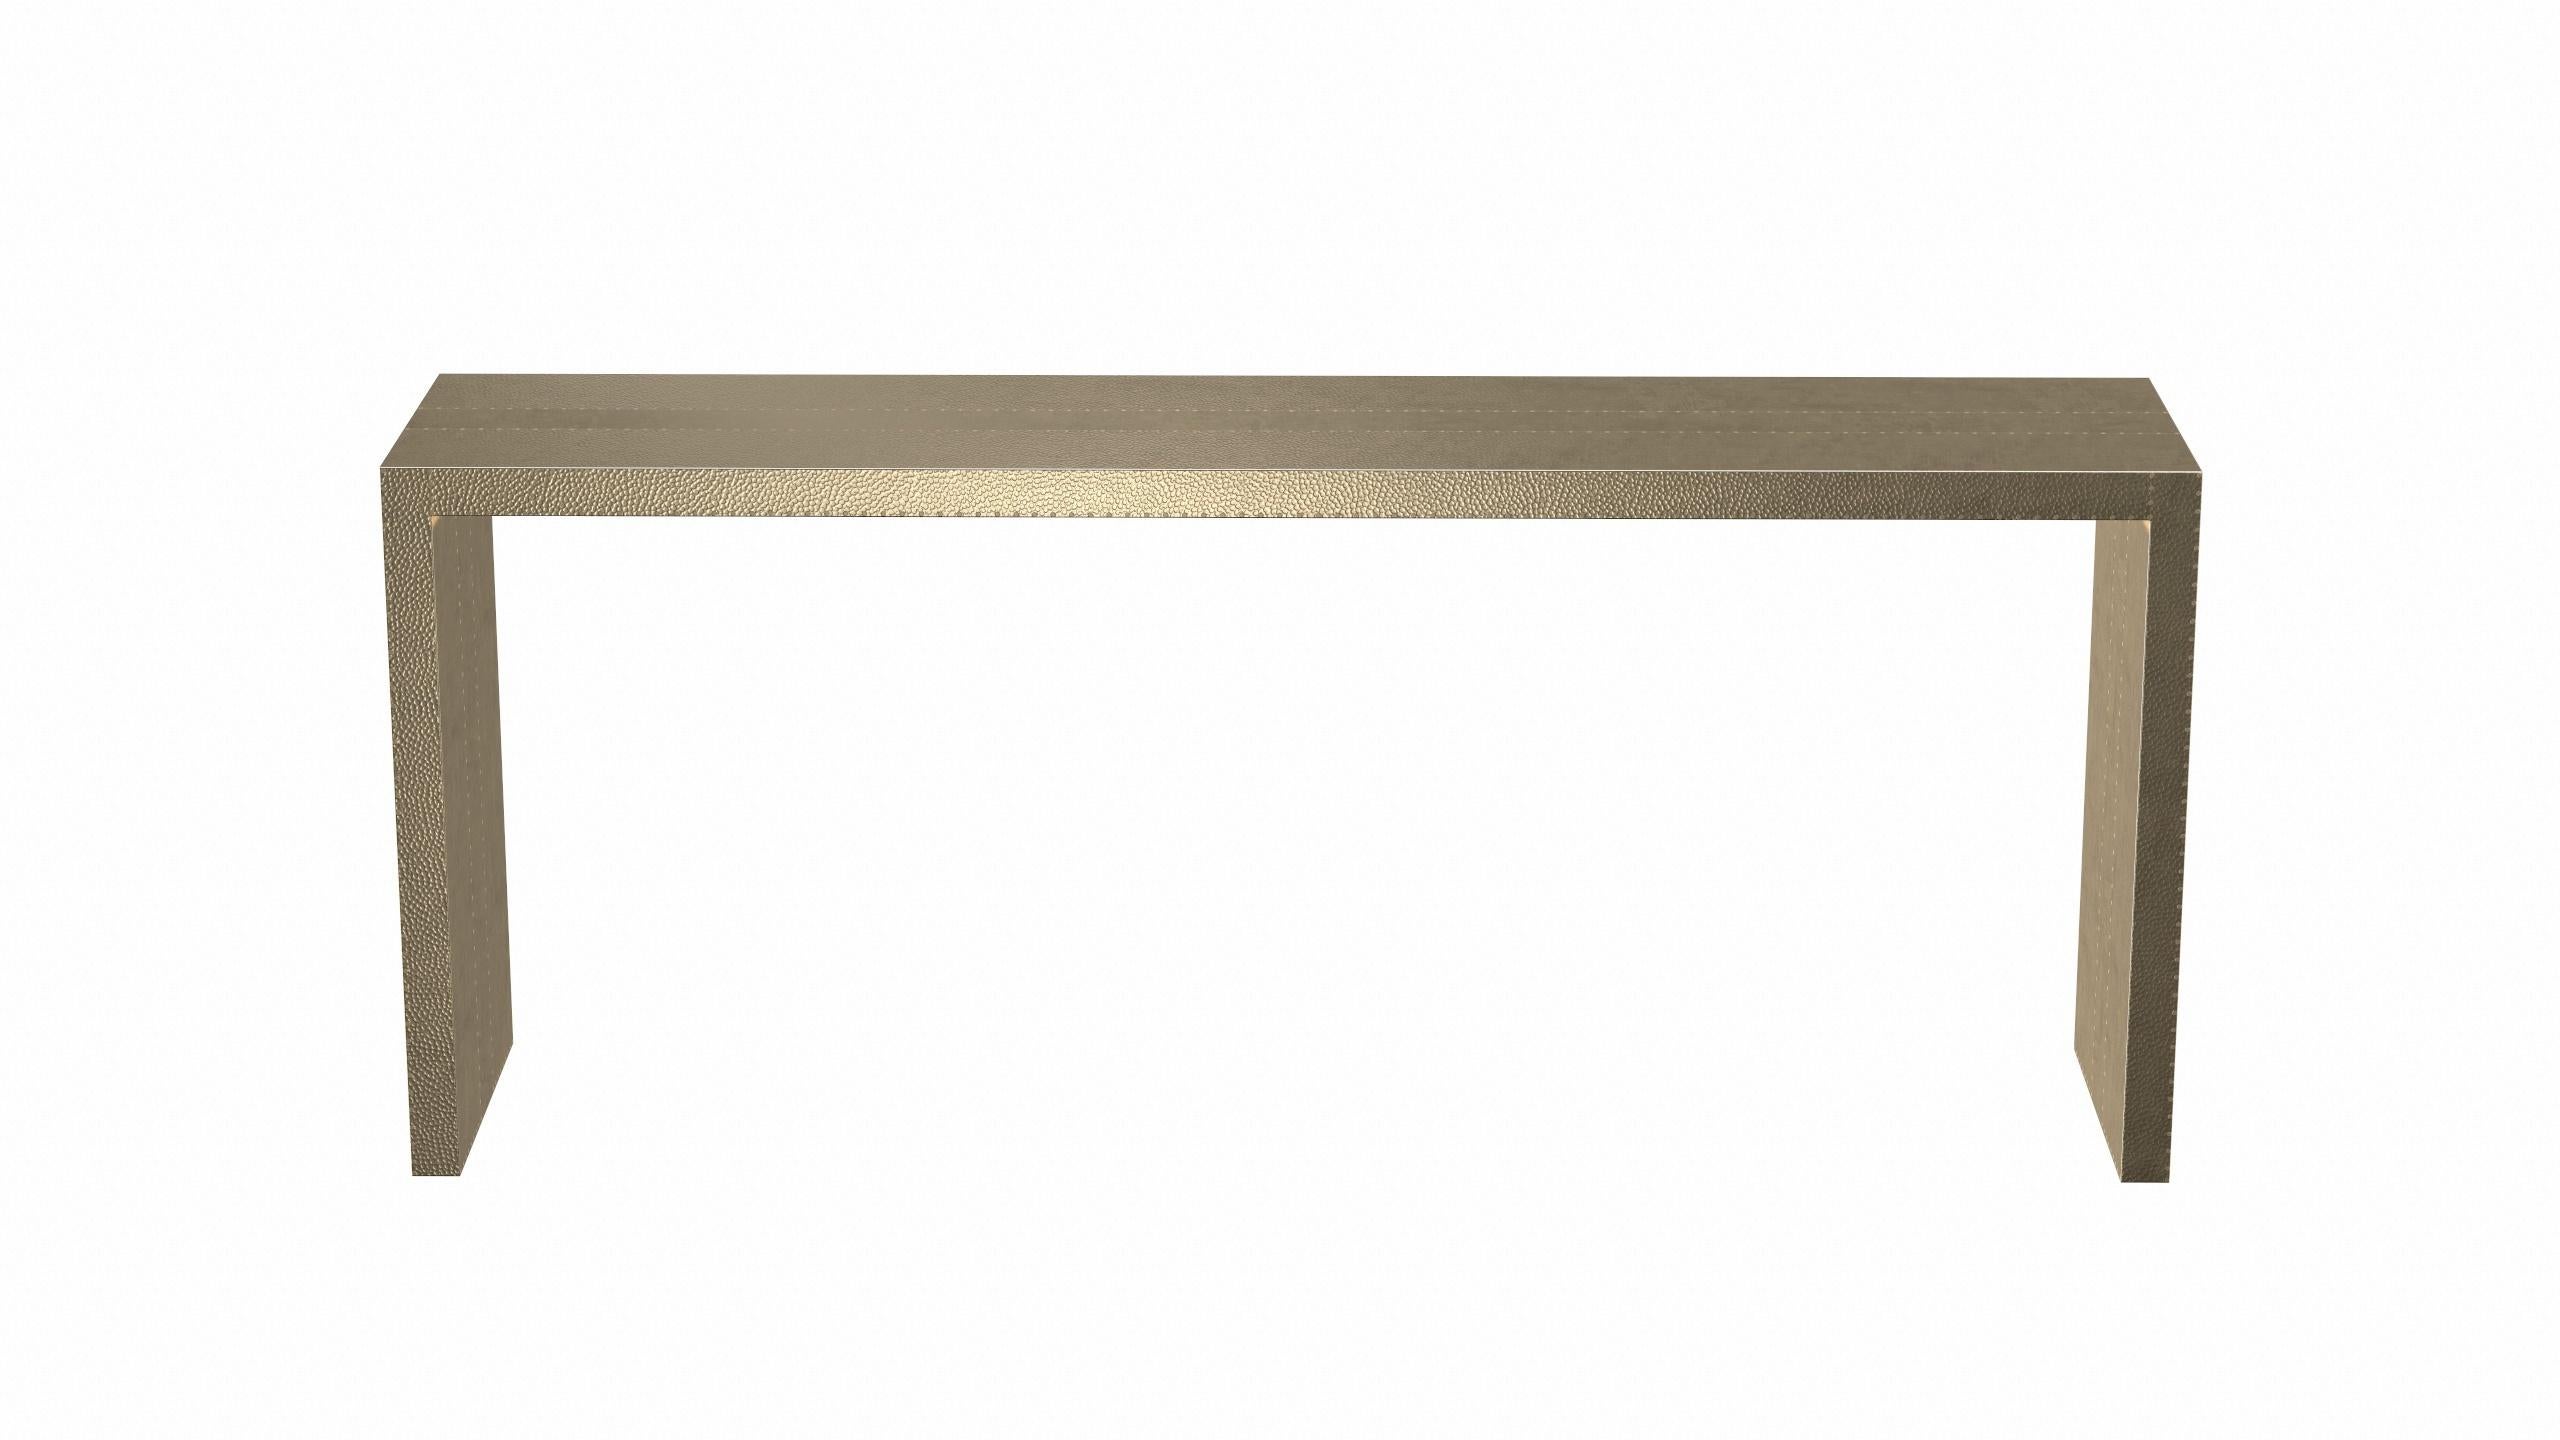 Woodwork Art Deco Rectangular Console Tables Mid. Hammered Brass by Alison Spear For Sale